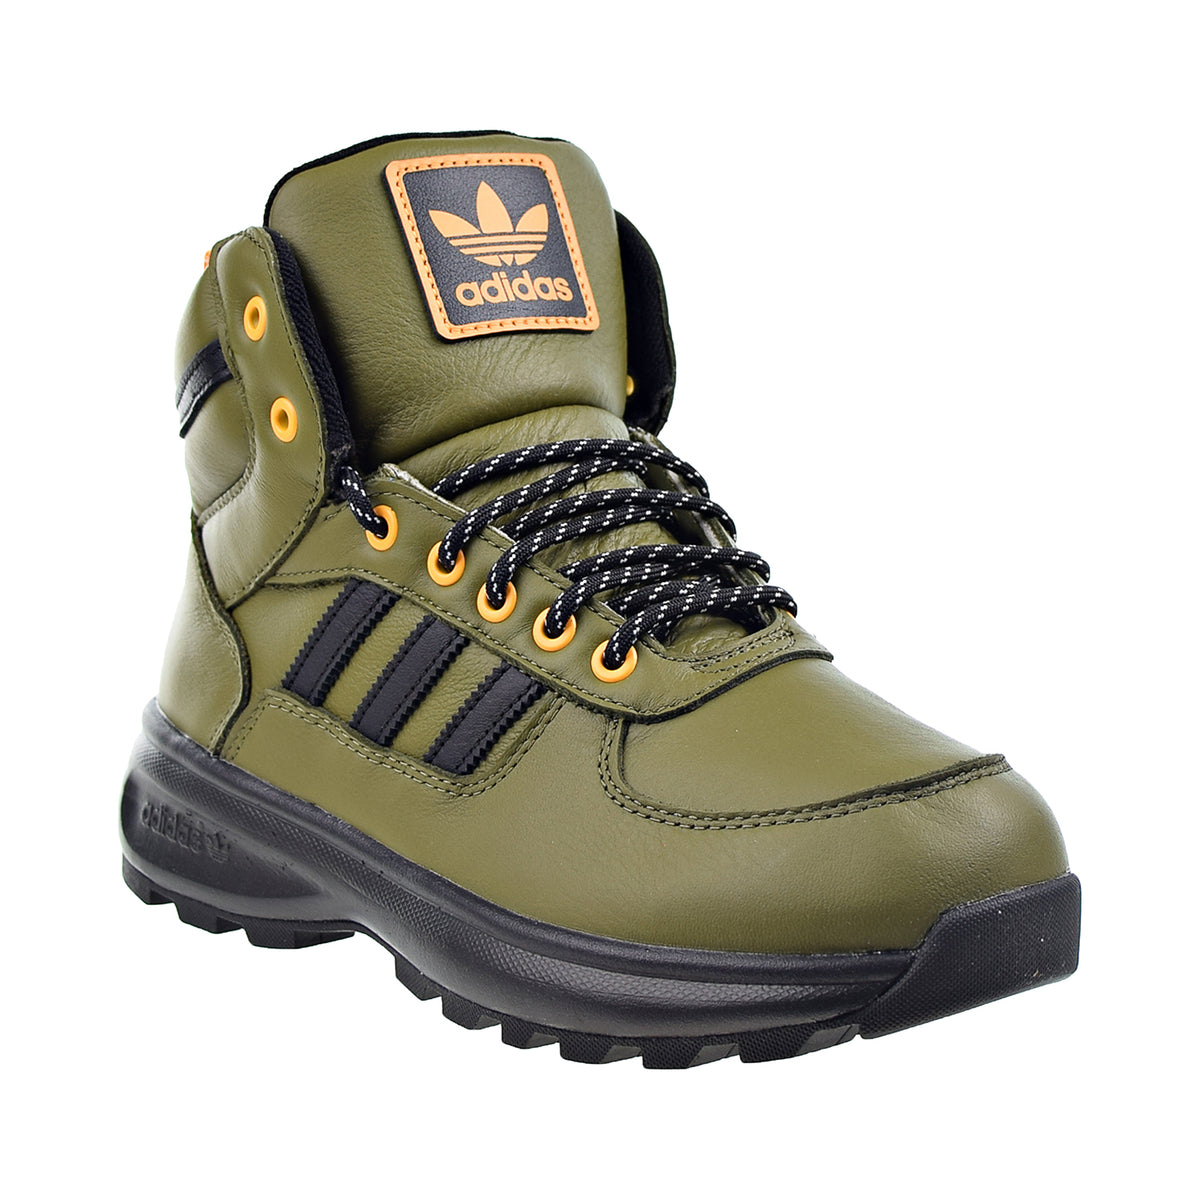 Adidas Boots Olive-Black-Gold